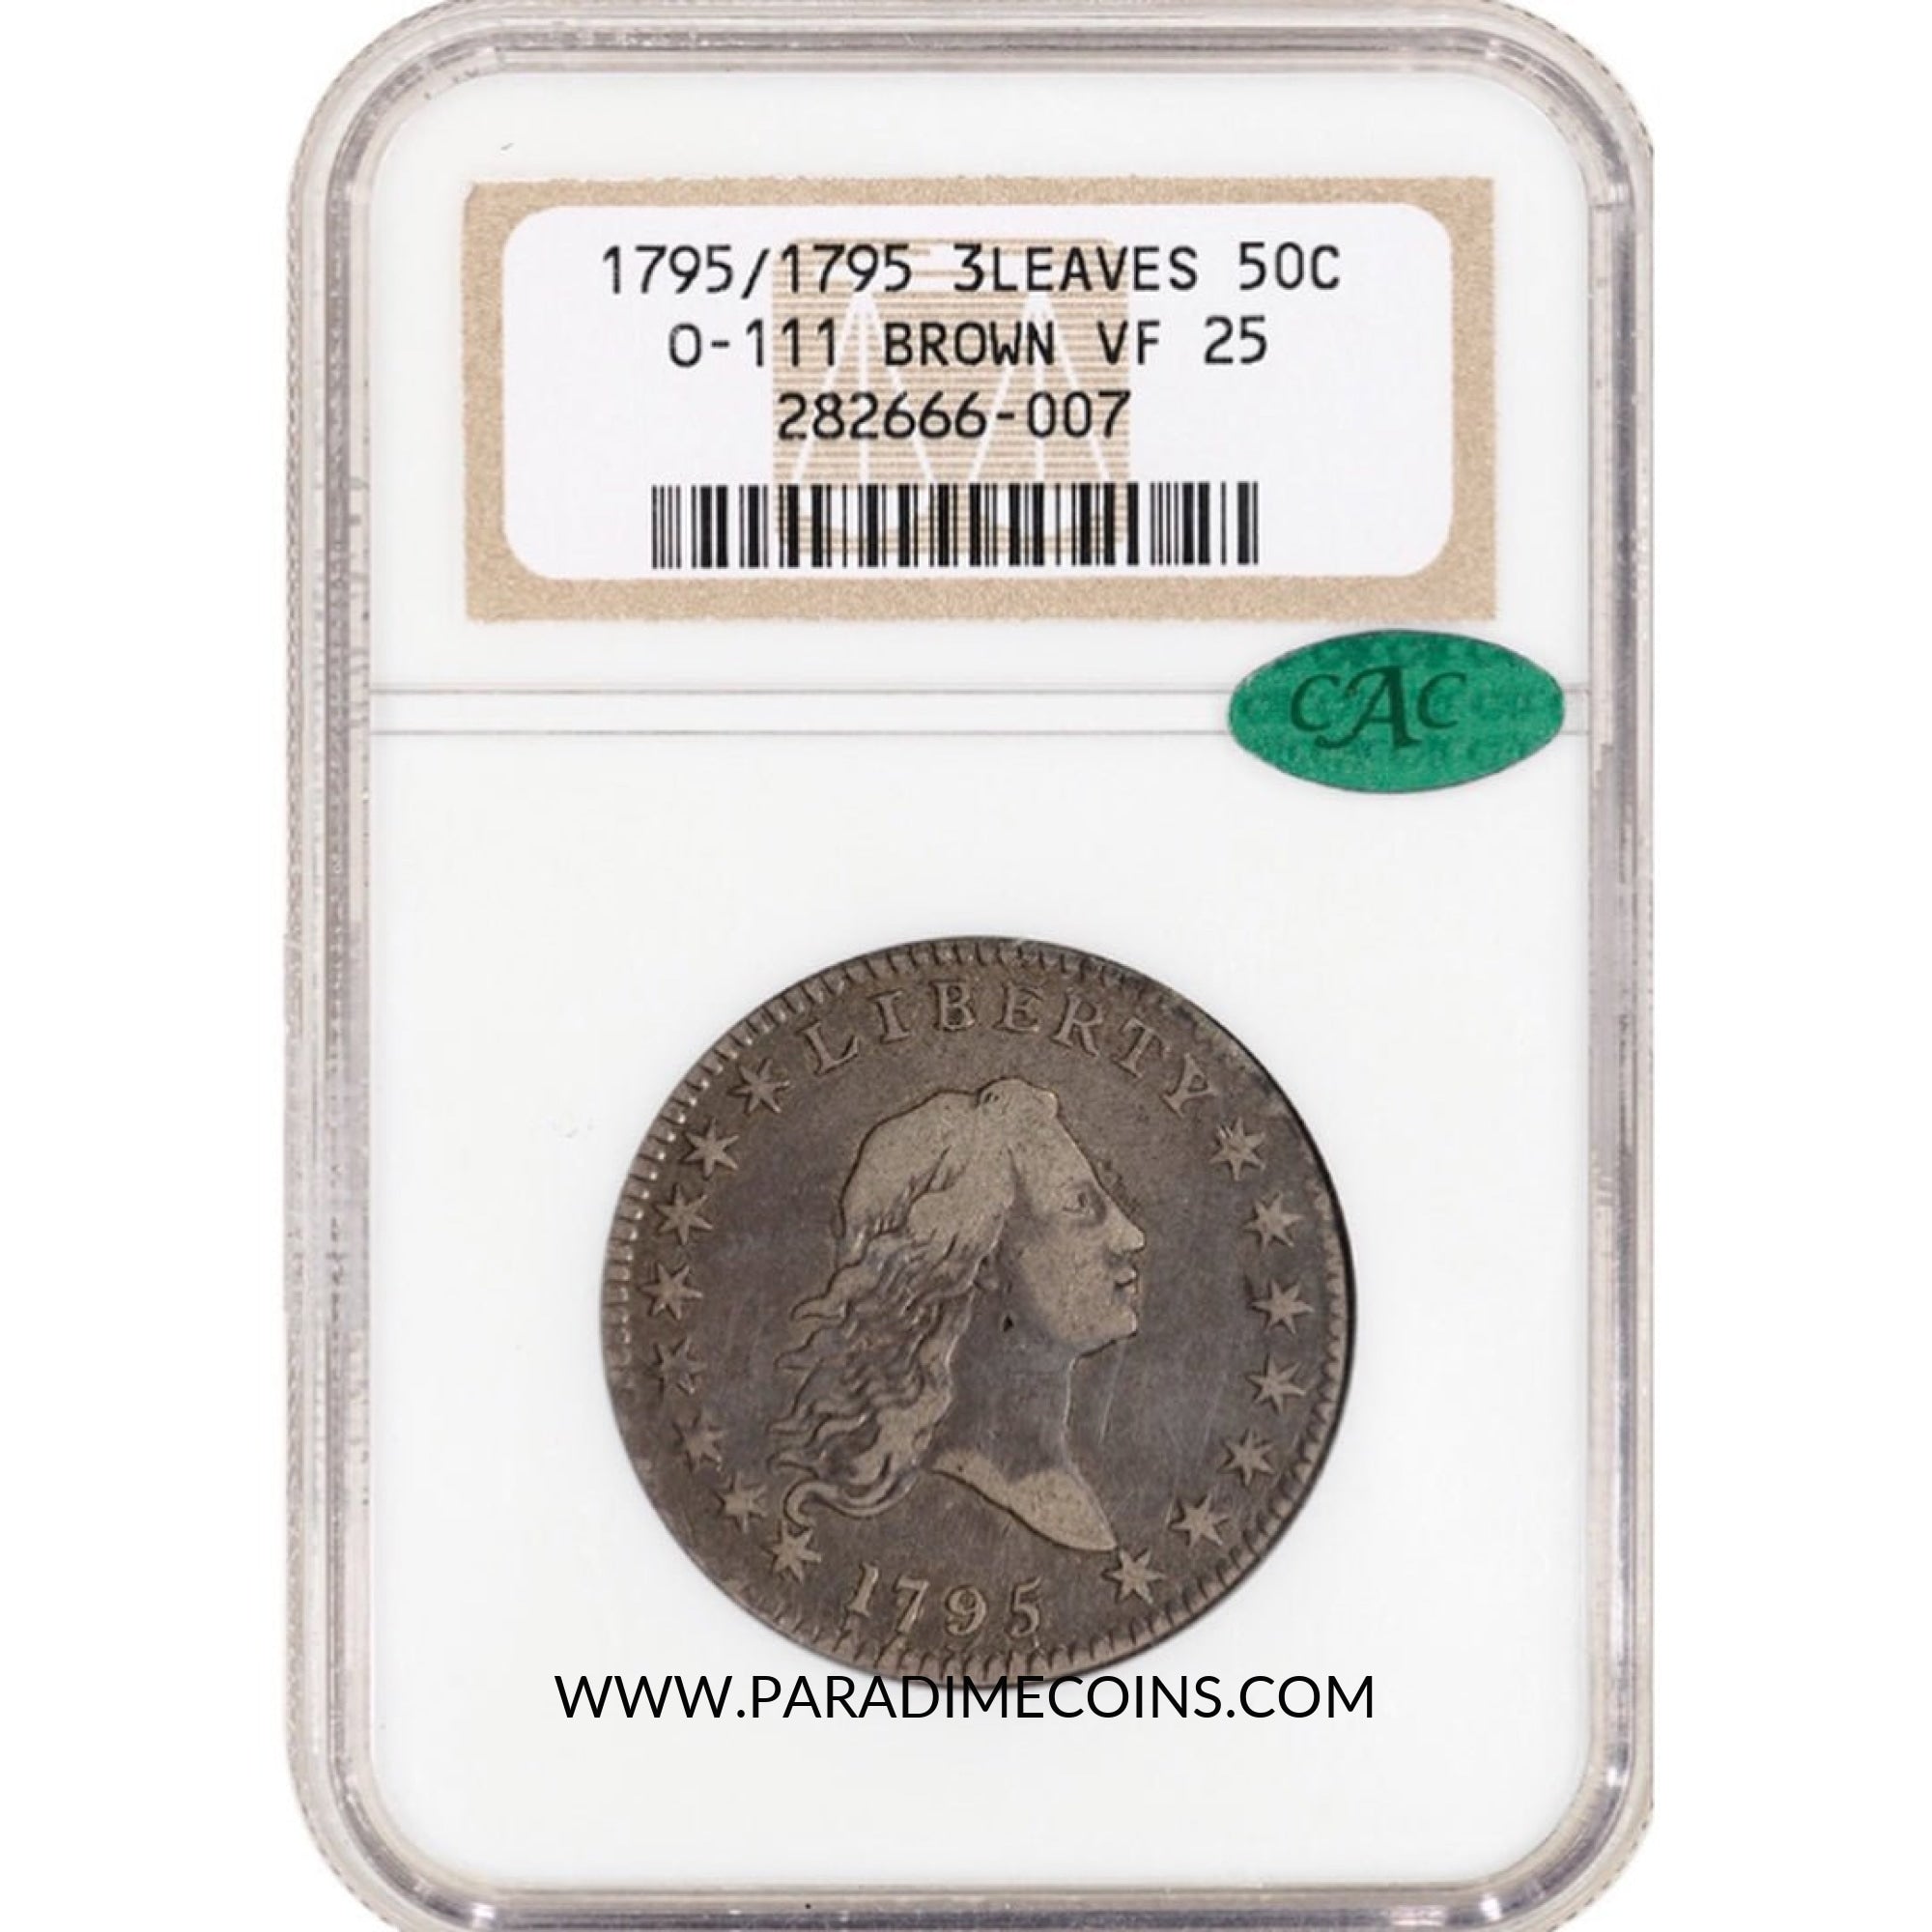 1795/1795 3 LEAVES 50C VF25 NGC OGH CAC - Paradime Coins | PCGS NGC CACG CAC Rare US Numismatic Coins For Sale